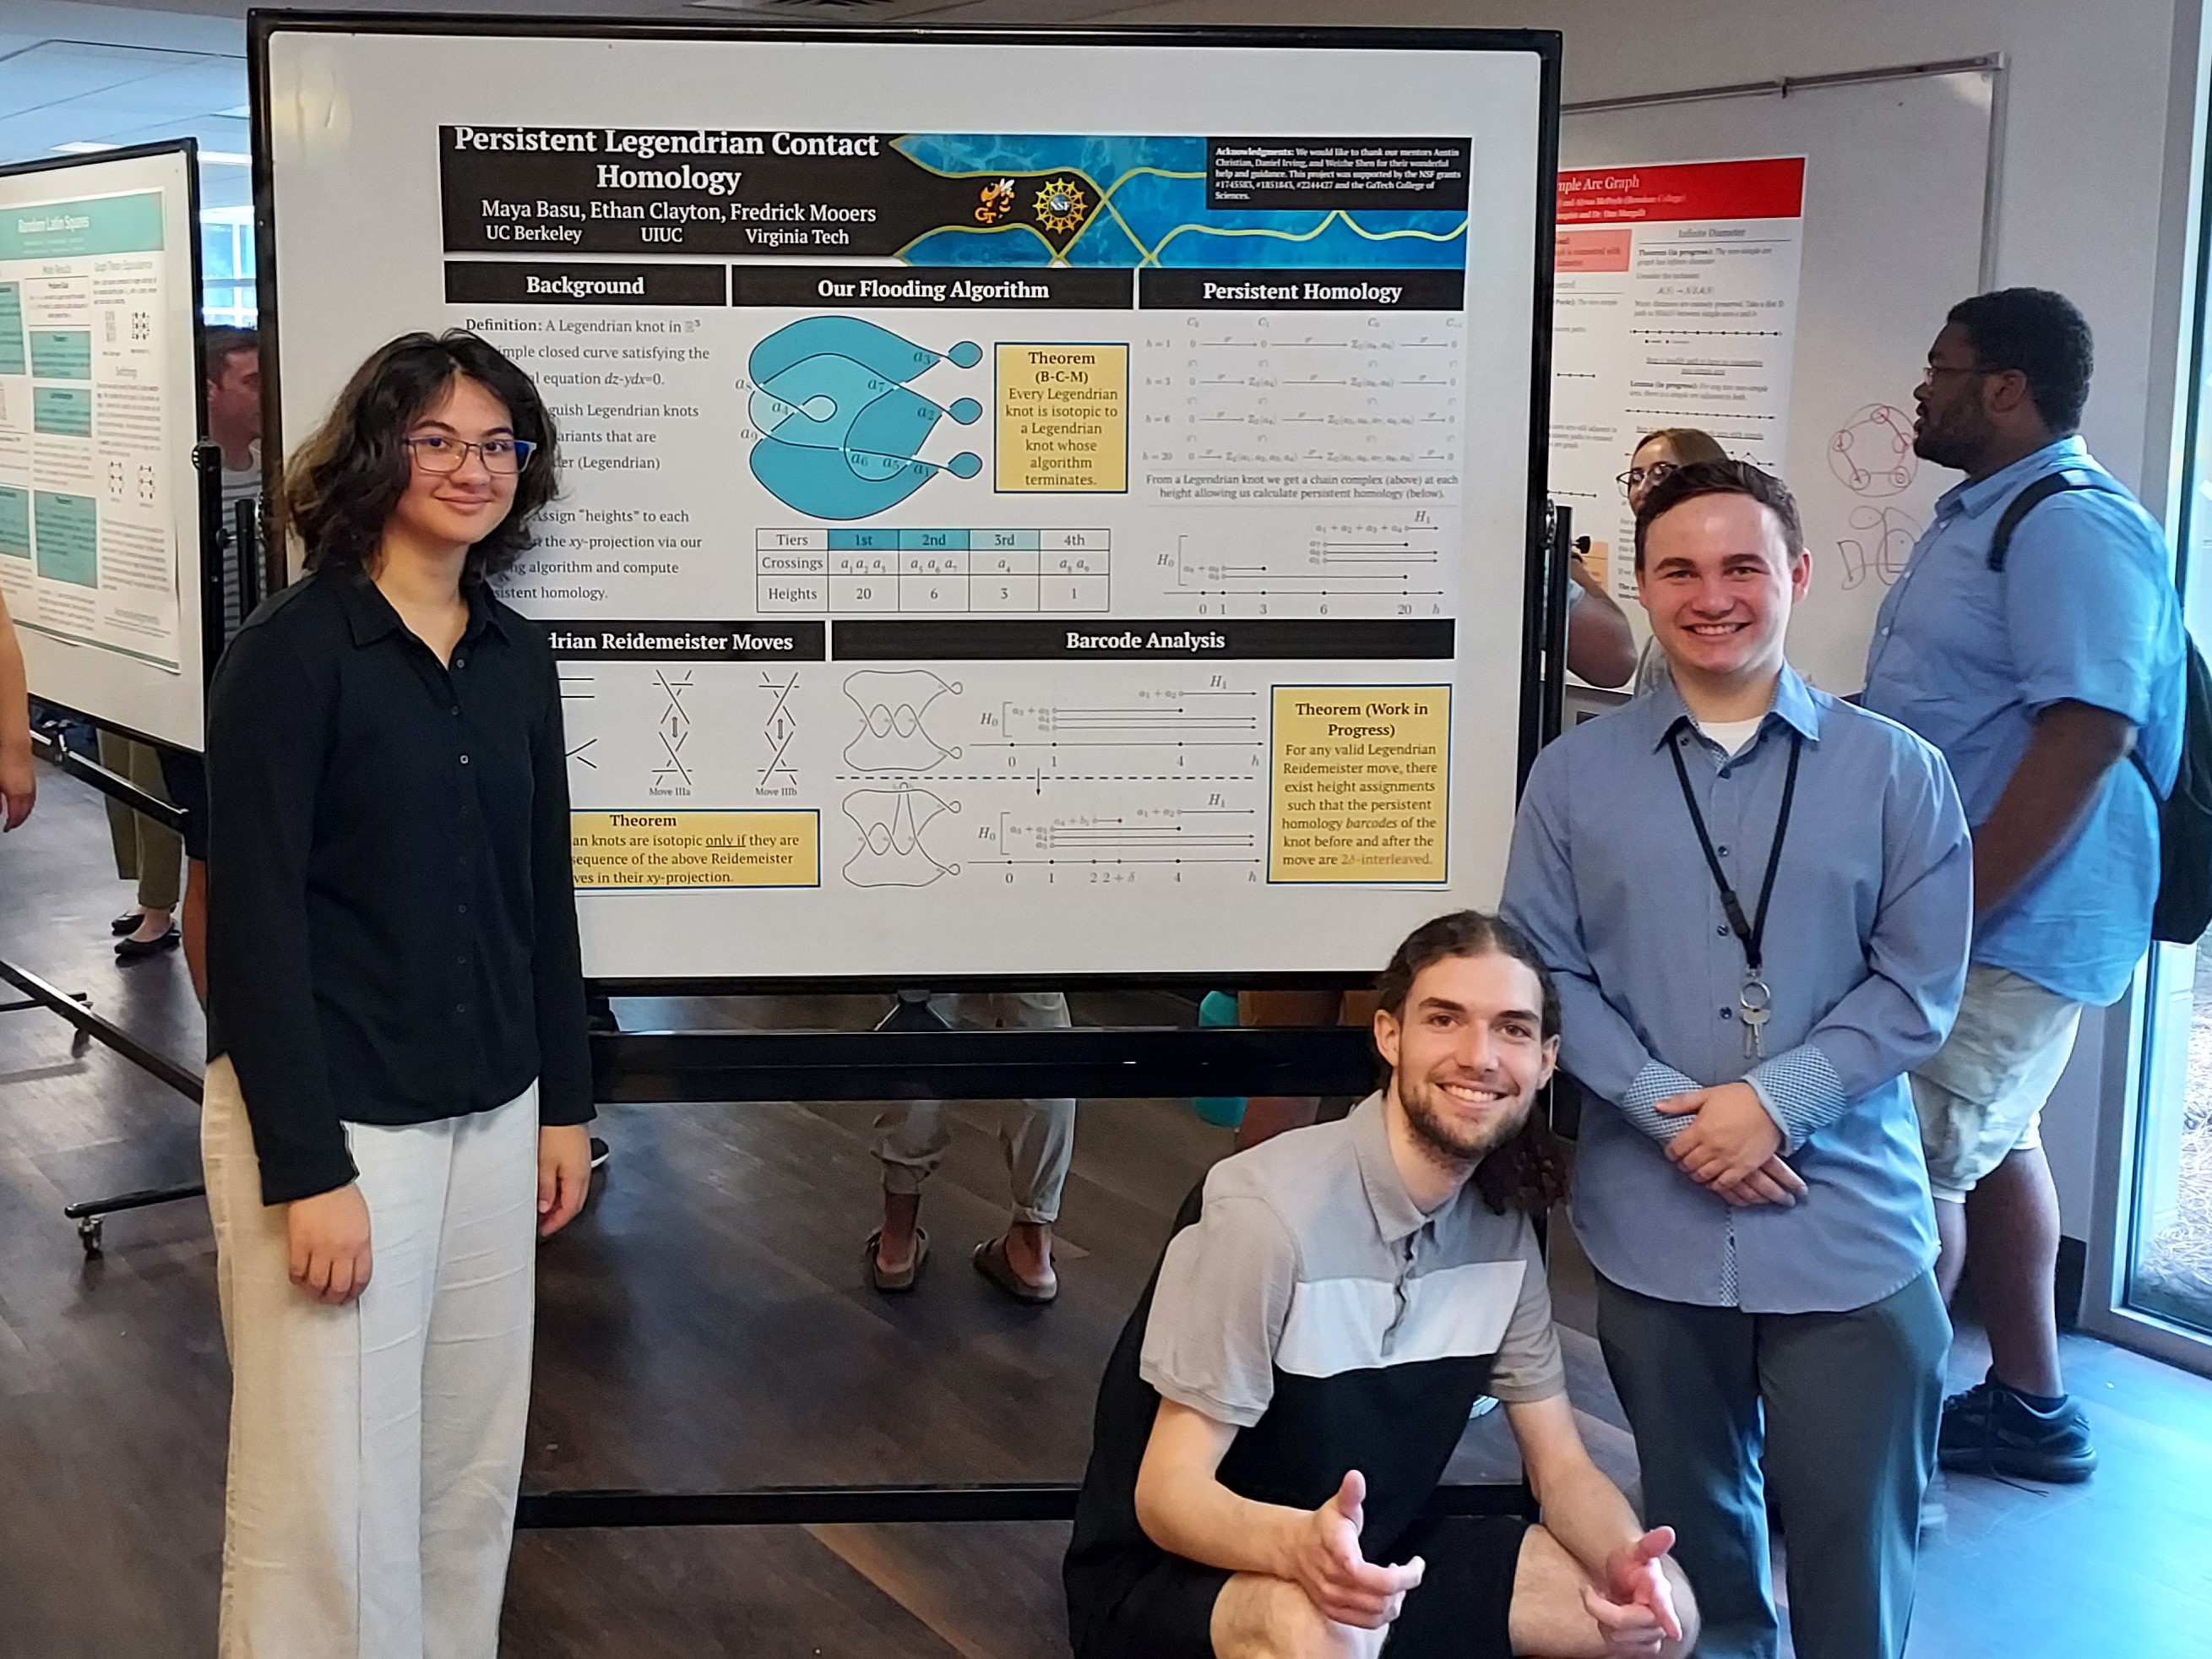 Mathematicians Maya Basu, Ethan Clayton, and Fredrick Mooers standing in front of their poster 'Persistent Legendrian Contact Homology'